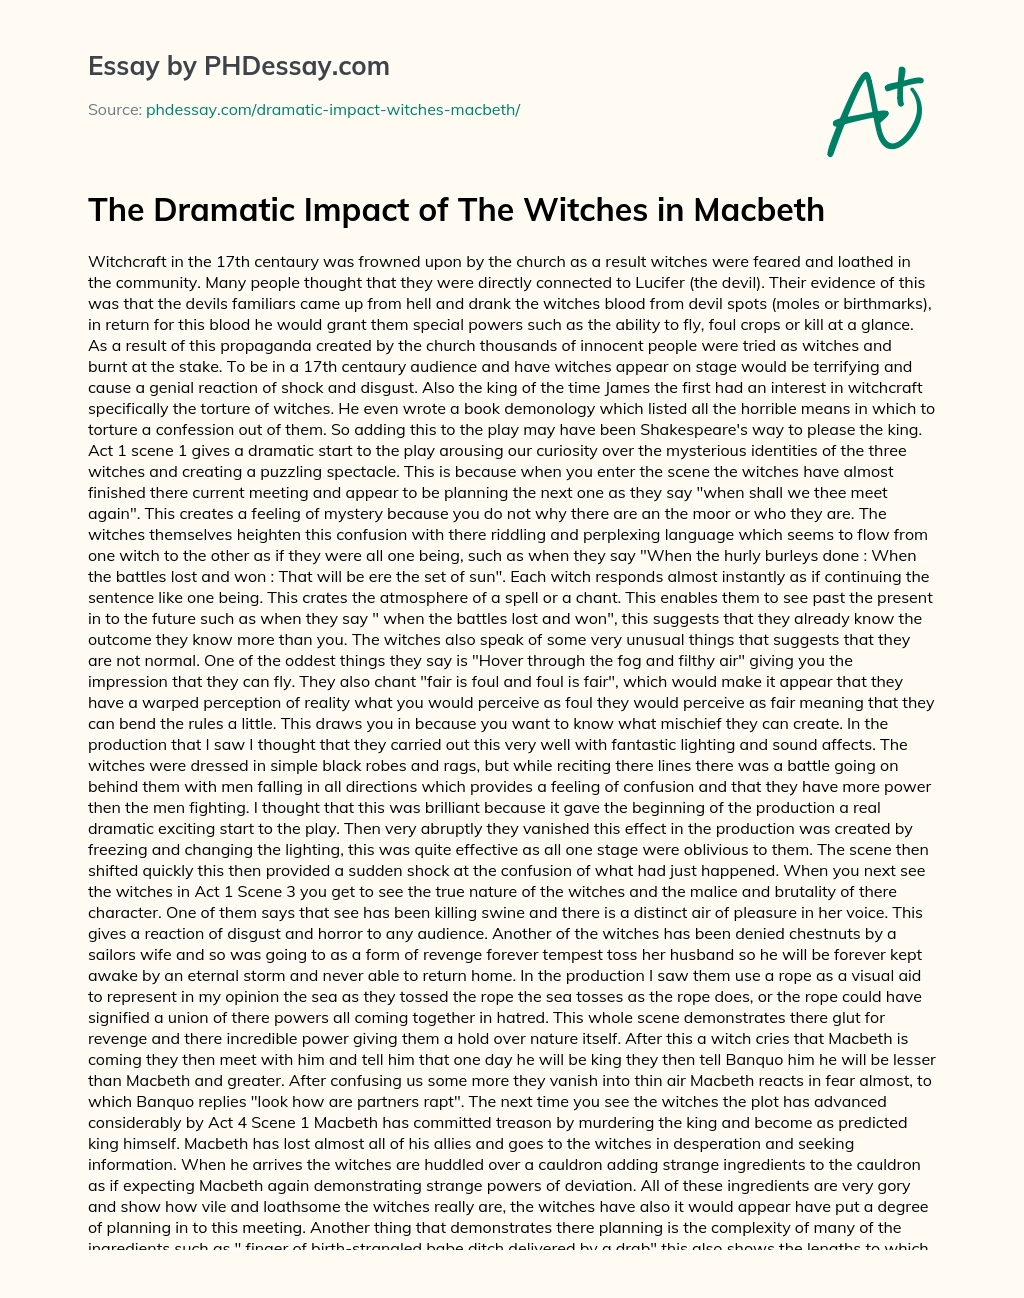 The Dramatic Impact of The Witches in Macbeth essay